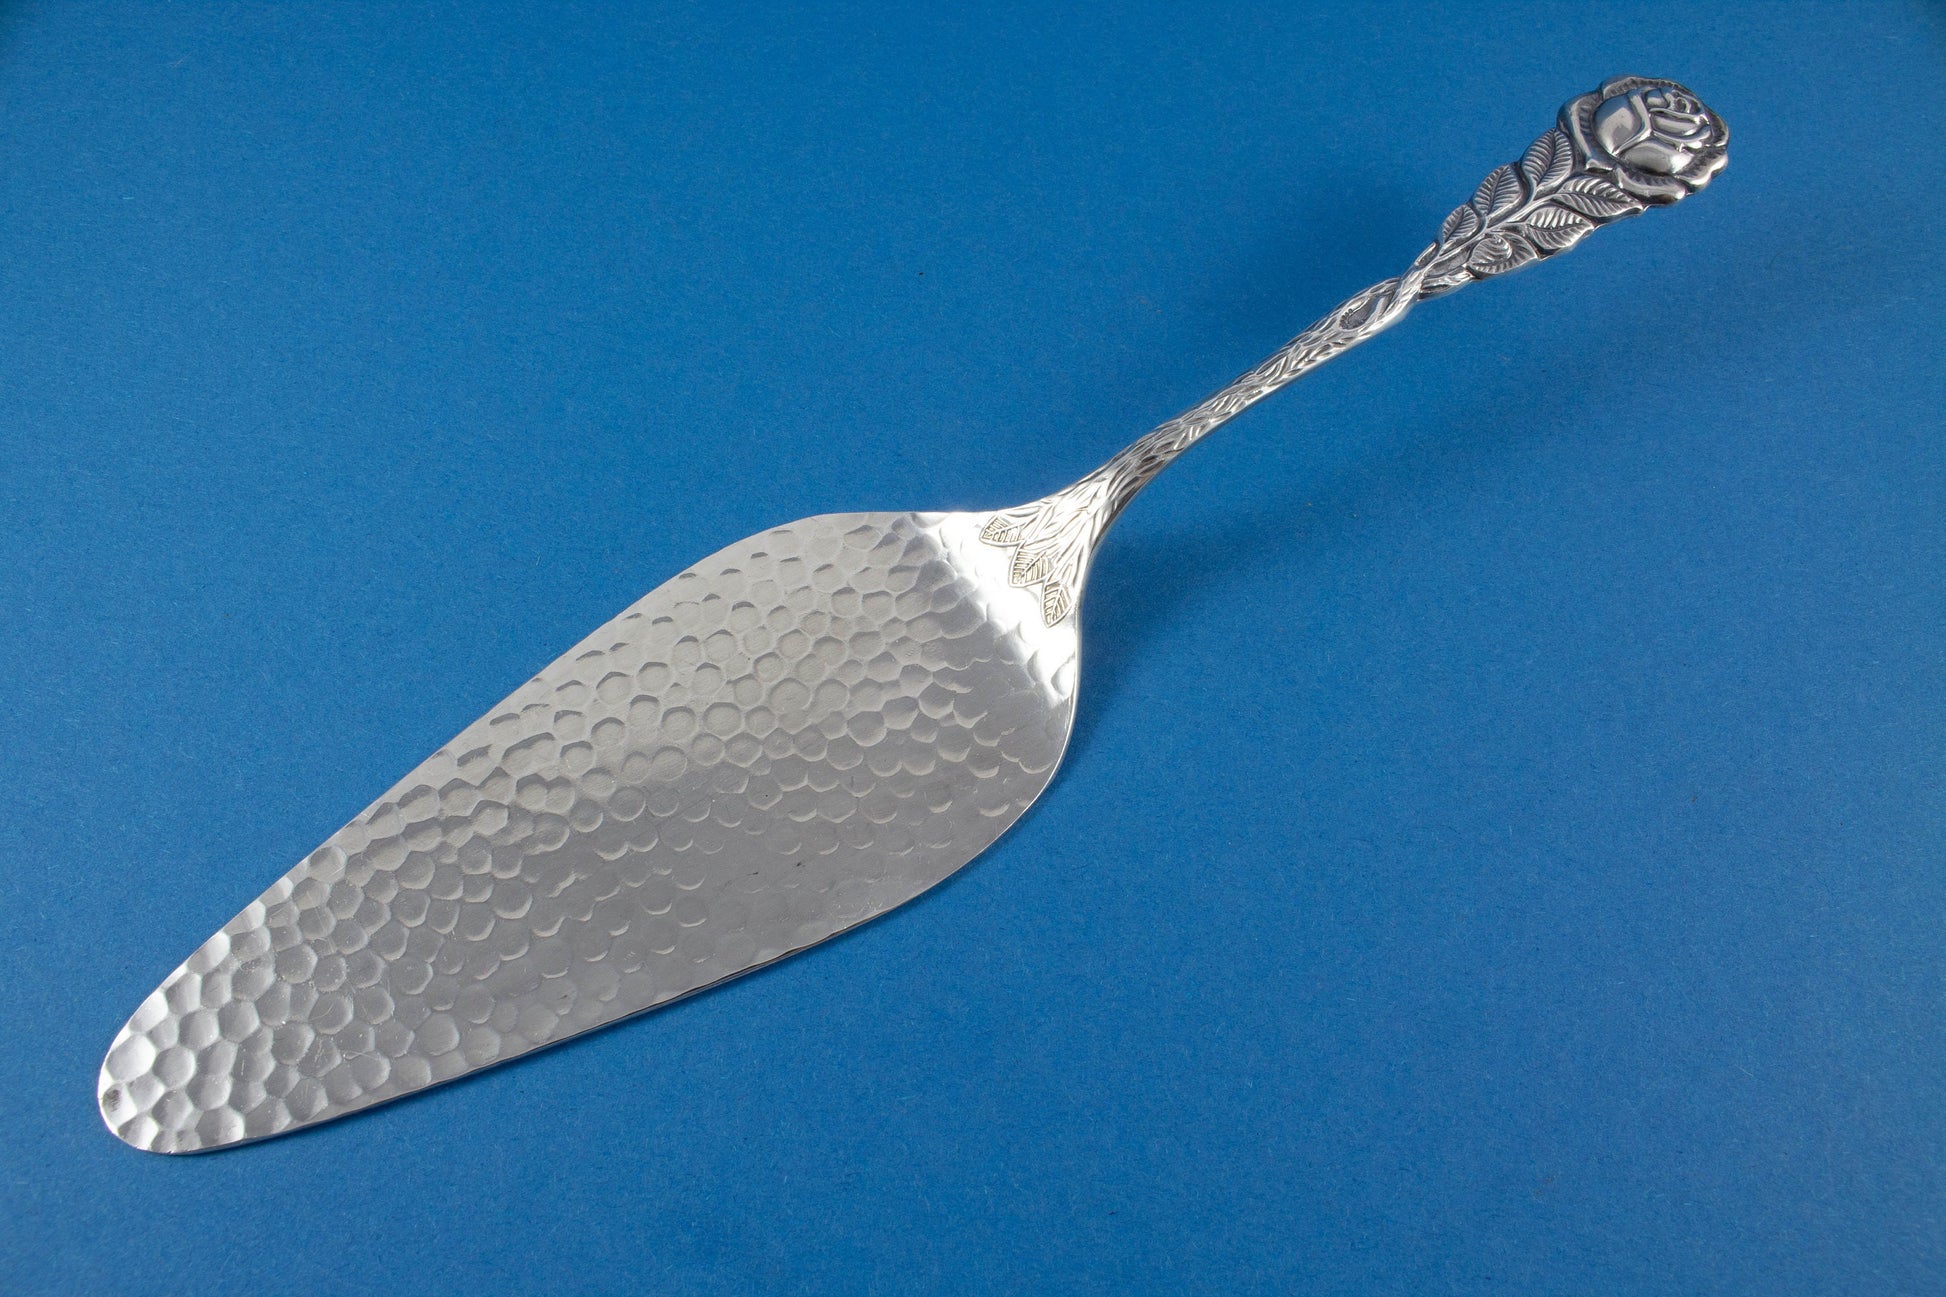 Cake server with rose decoration, silver-plated pastry server 